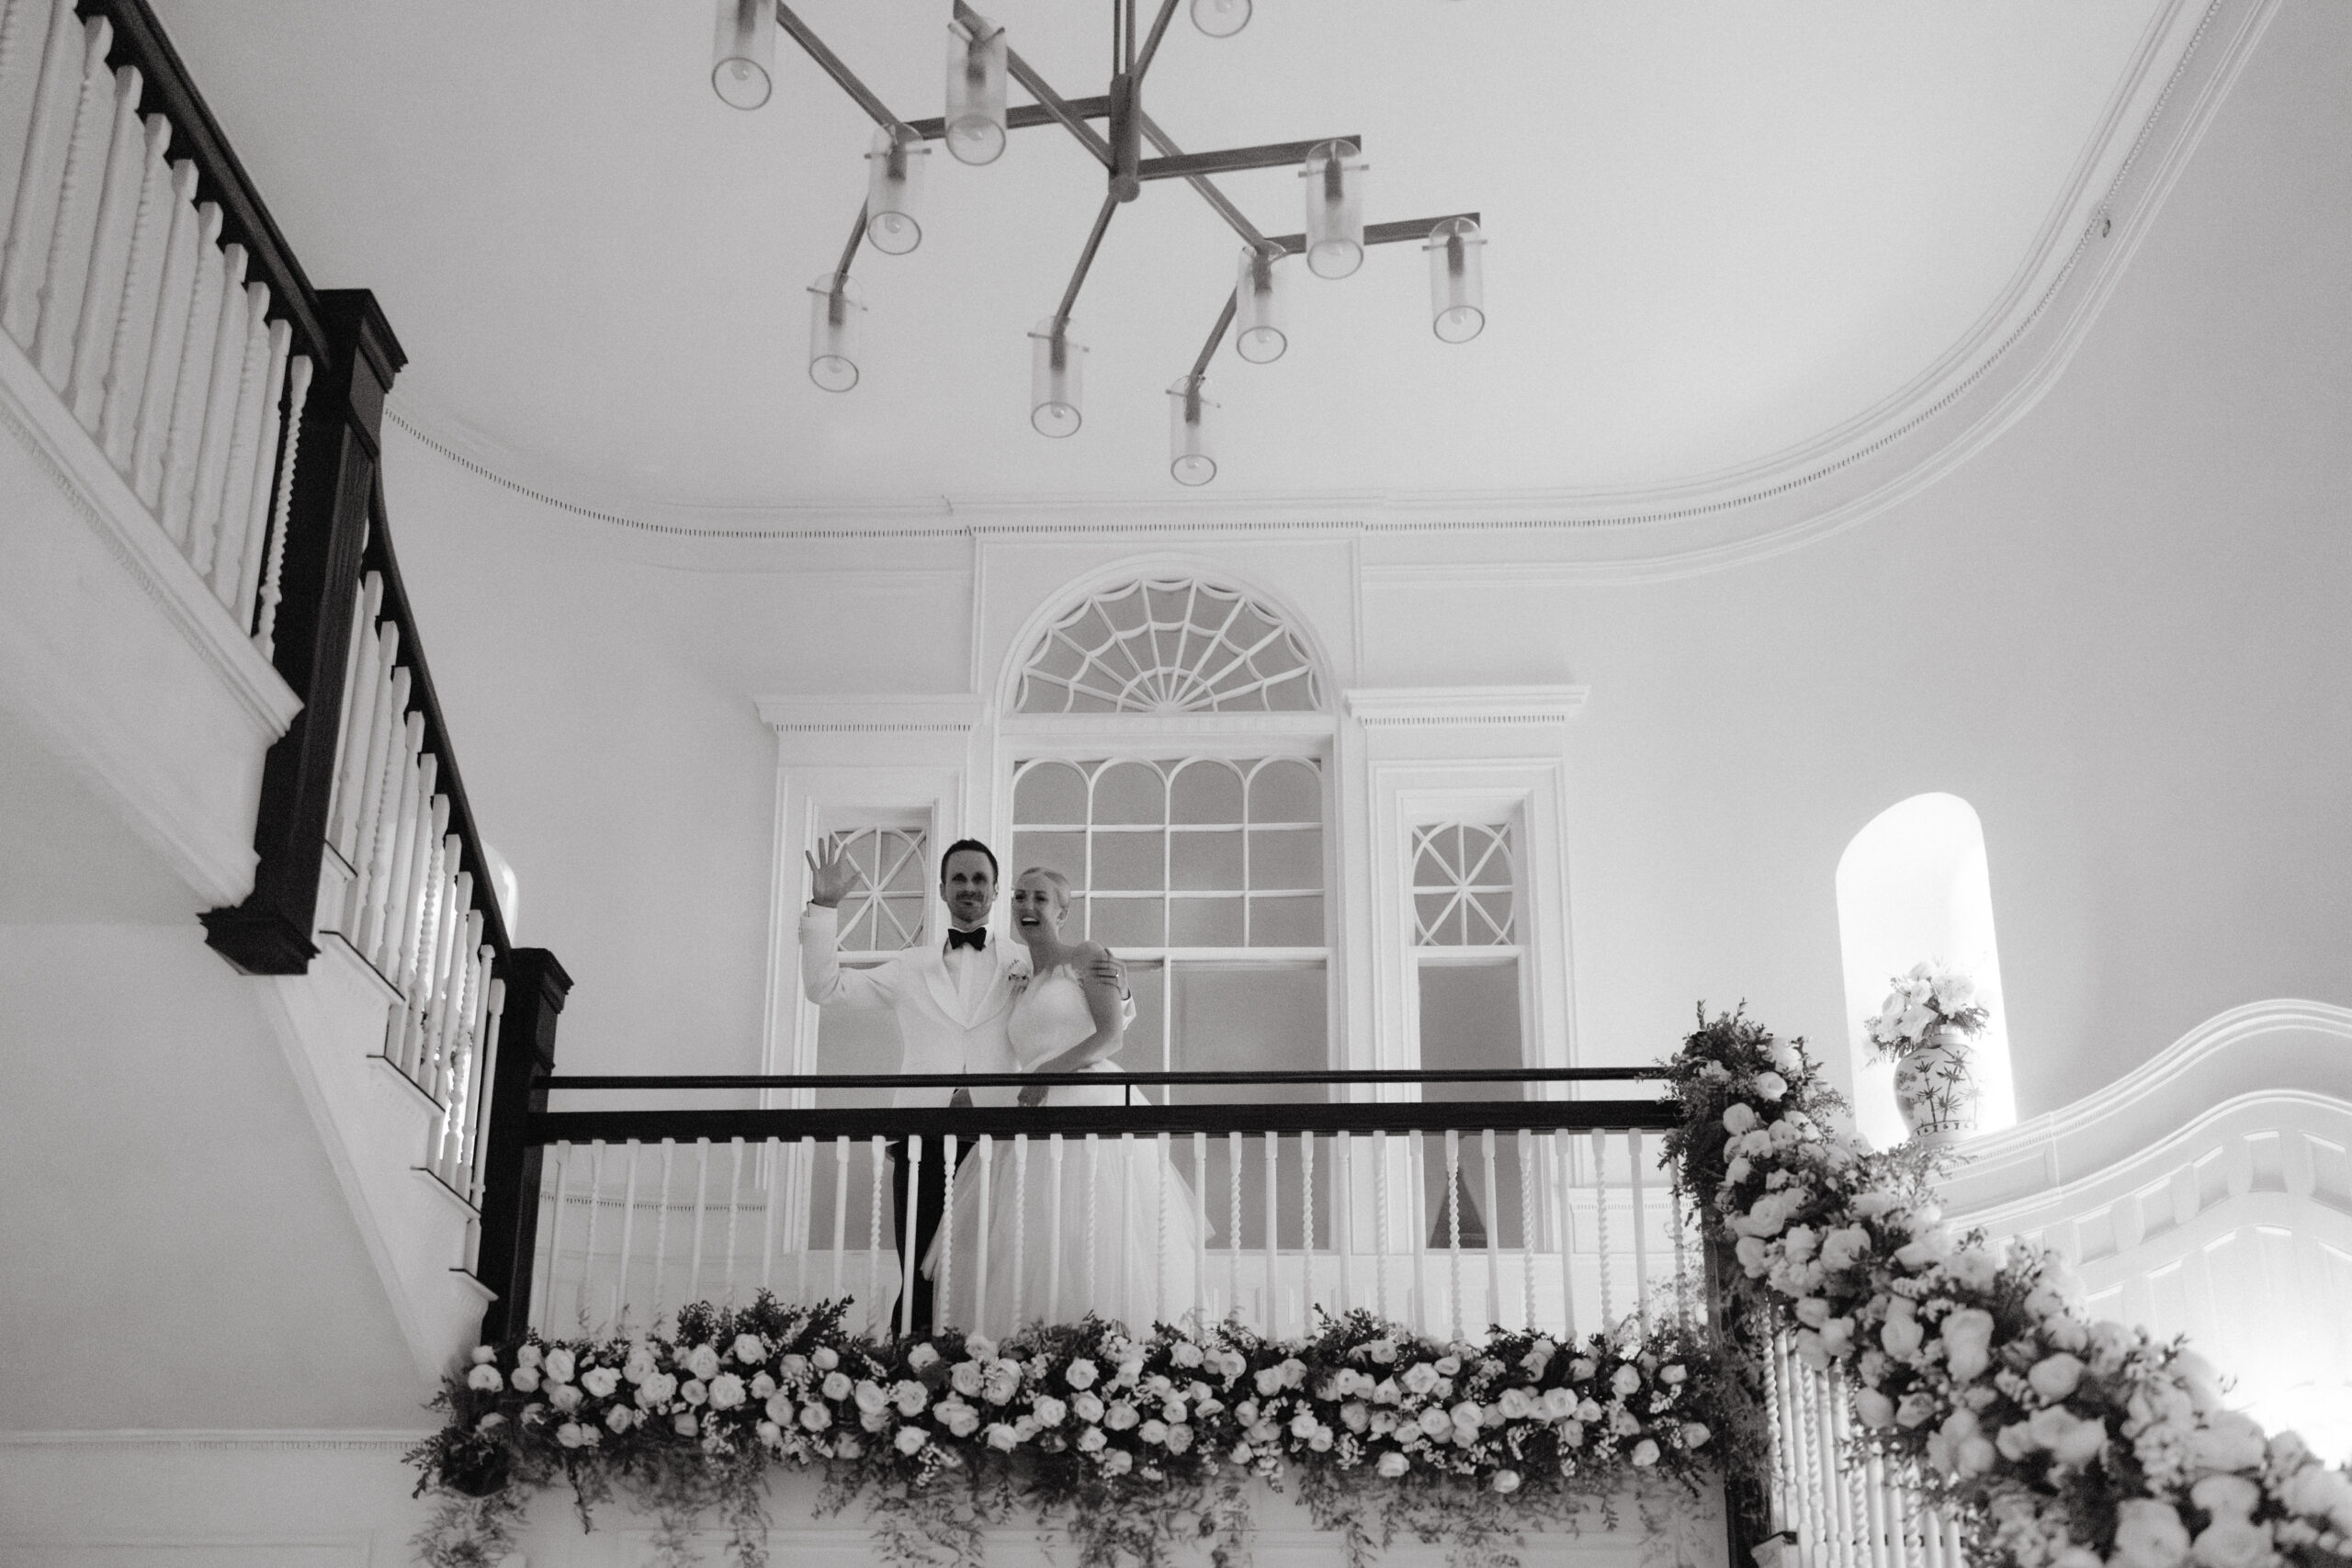 Black and white photo of the smiling bride and groom on top of the staircase filled with flowers. Wedding photography wish list photo by Jenny Fu Studio